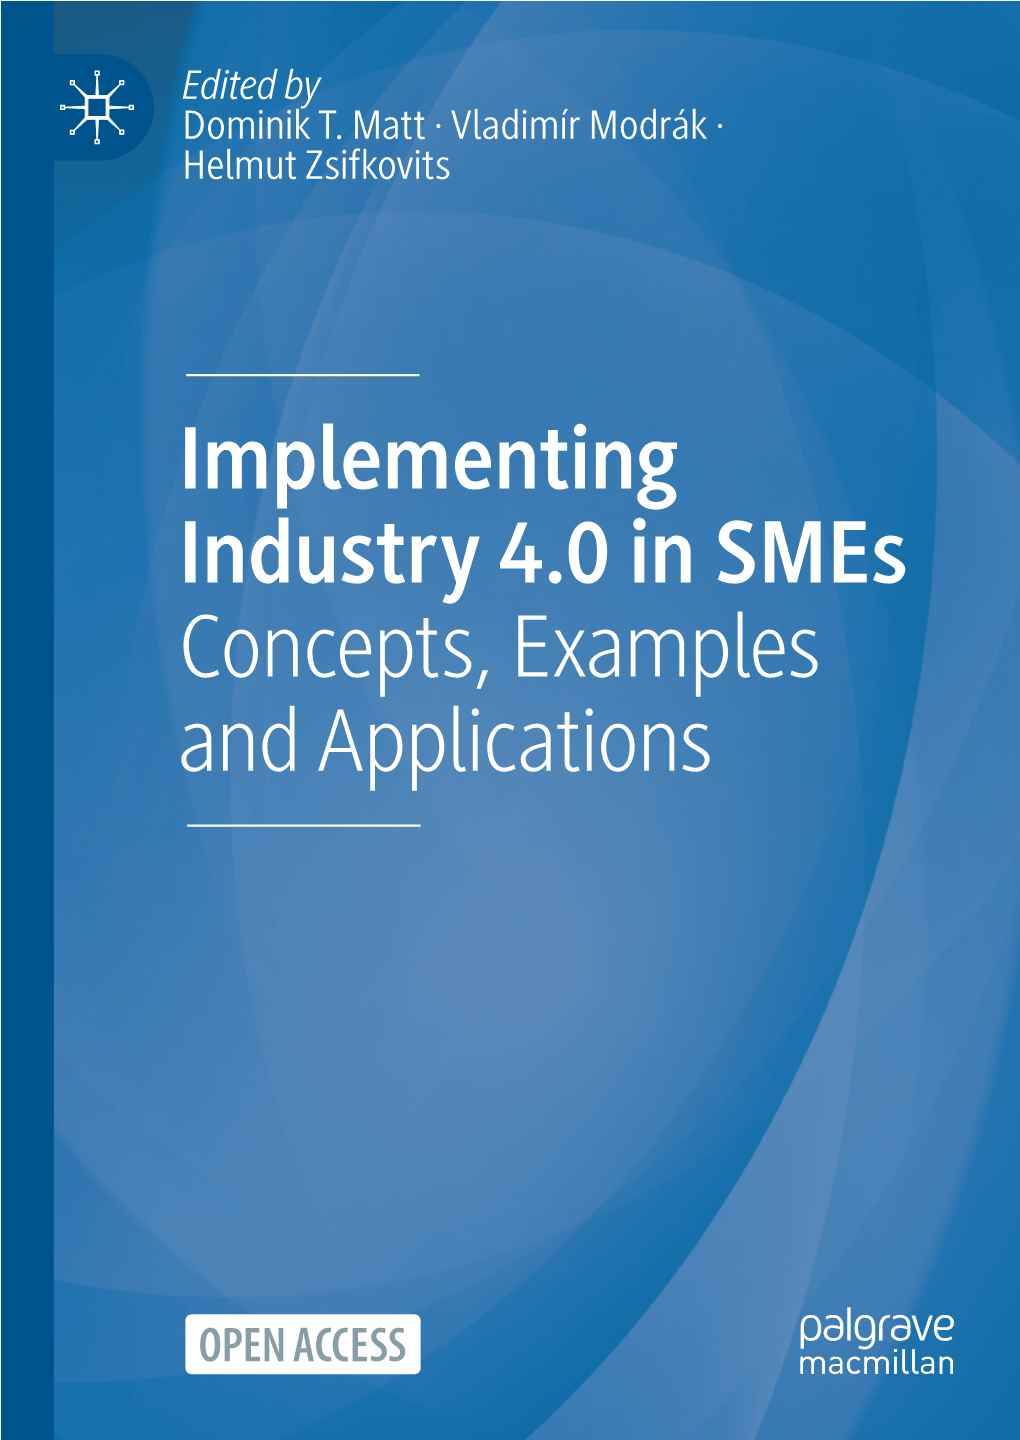 Implementing Industry 4.0 in Smes Concepts, Examples and Applications